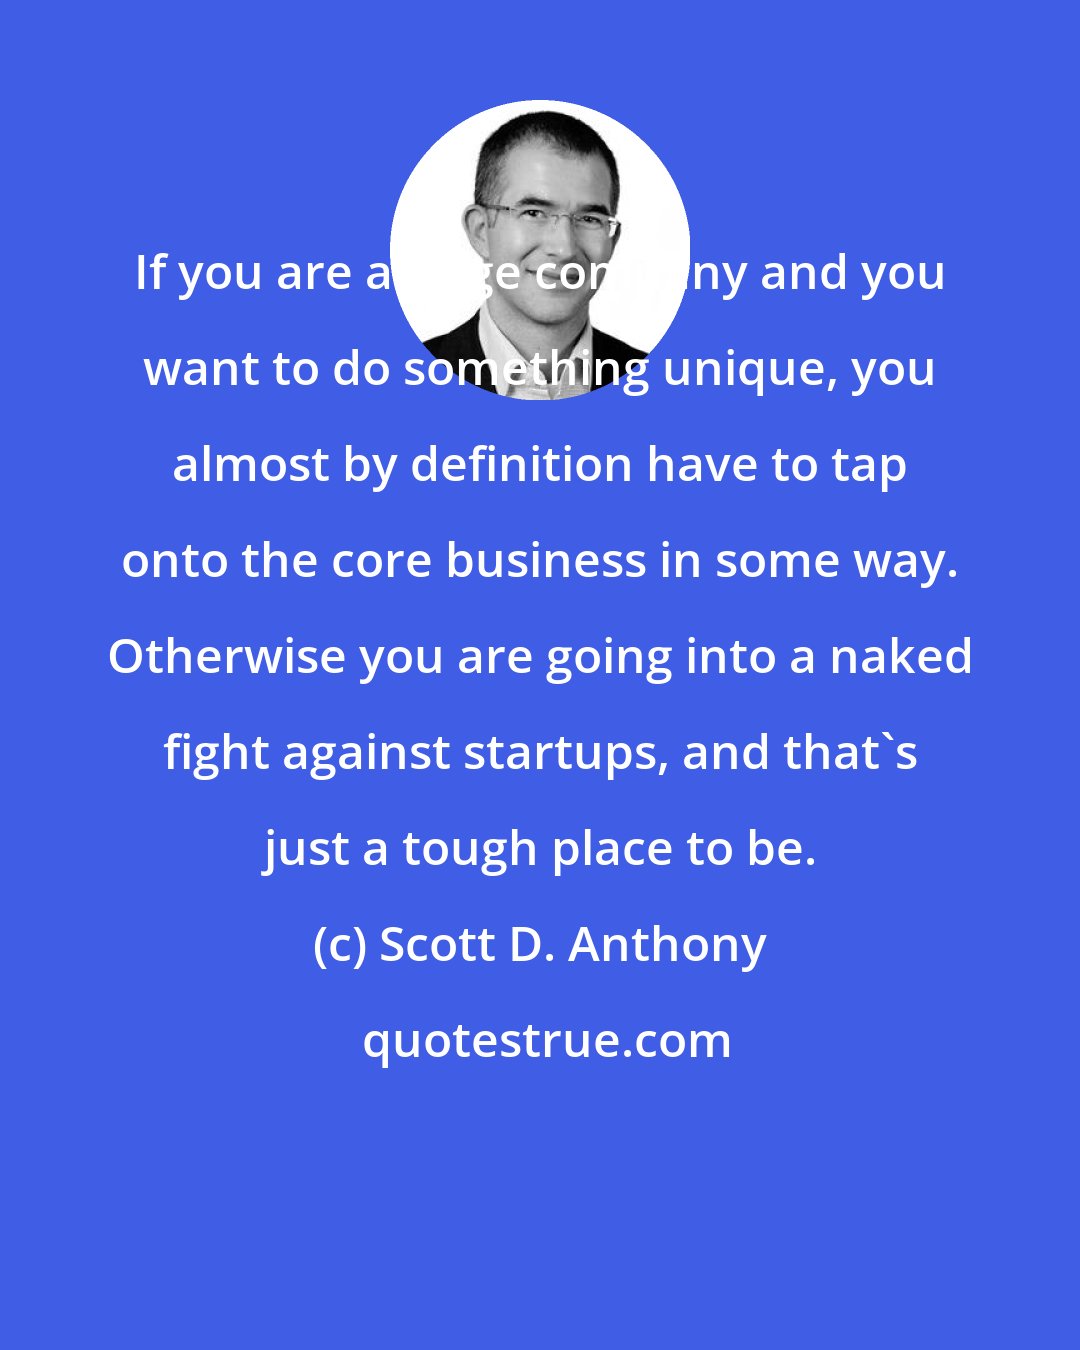 Scott D. Anthony: If you are a large company and you want to do something unique, you almost by definition have to tap onto the core business in some way. Otherwise you are going into a naked fight against startups, and that's just a tough place to be.